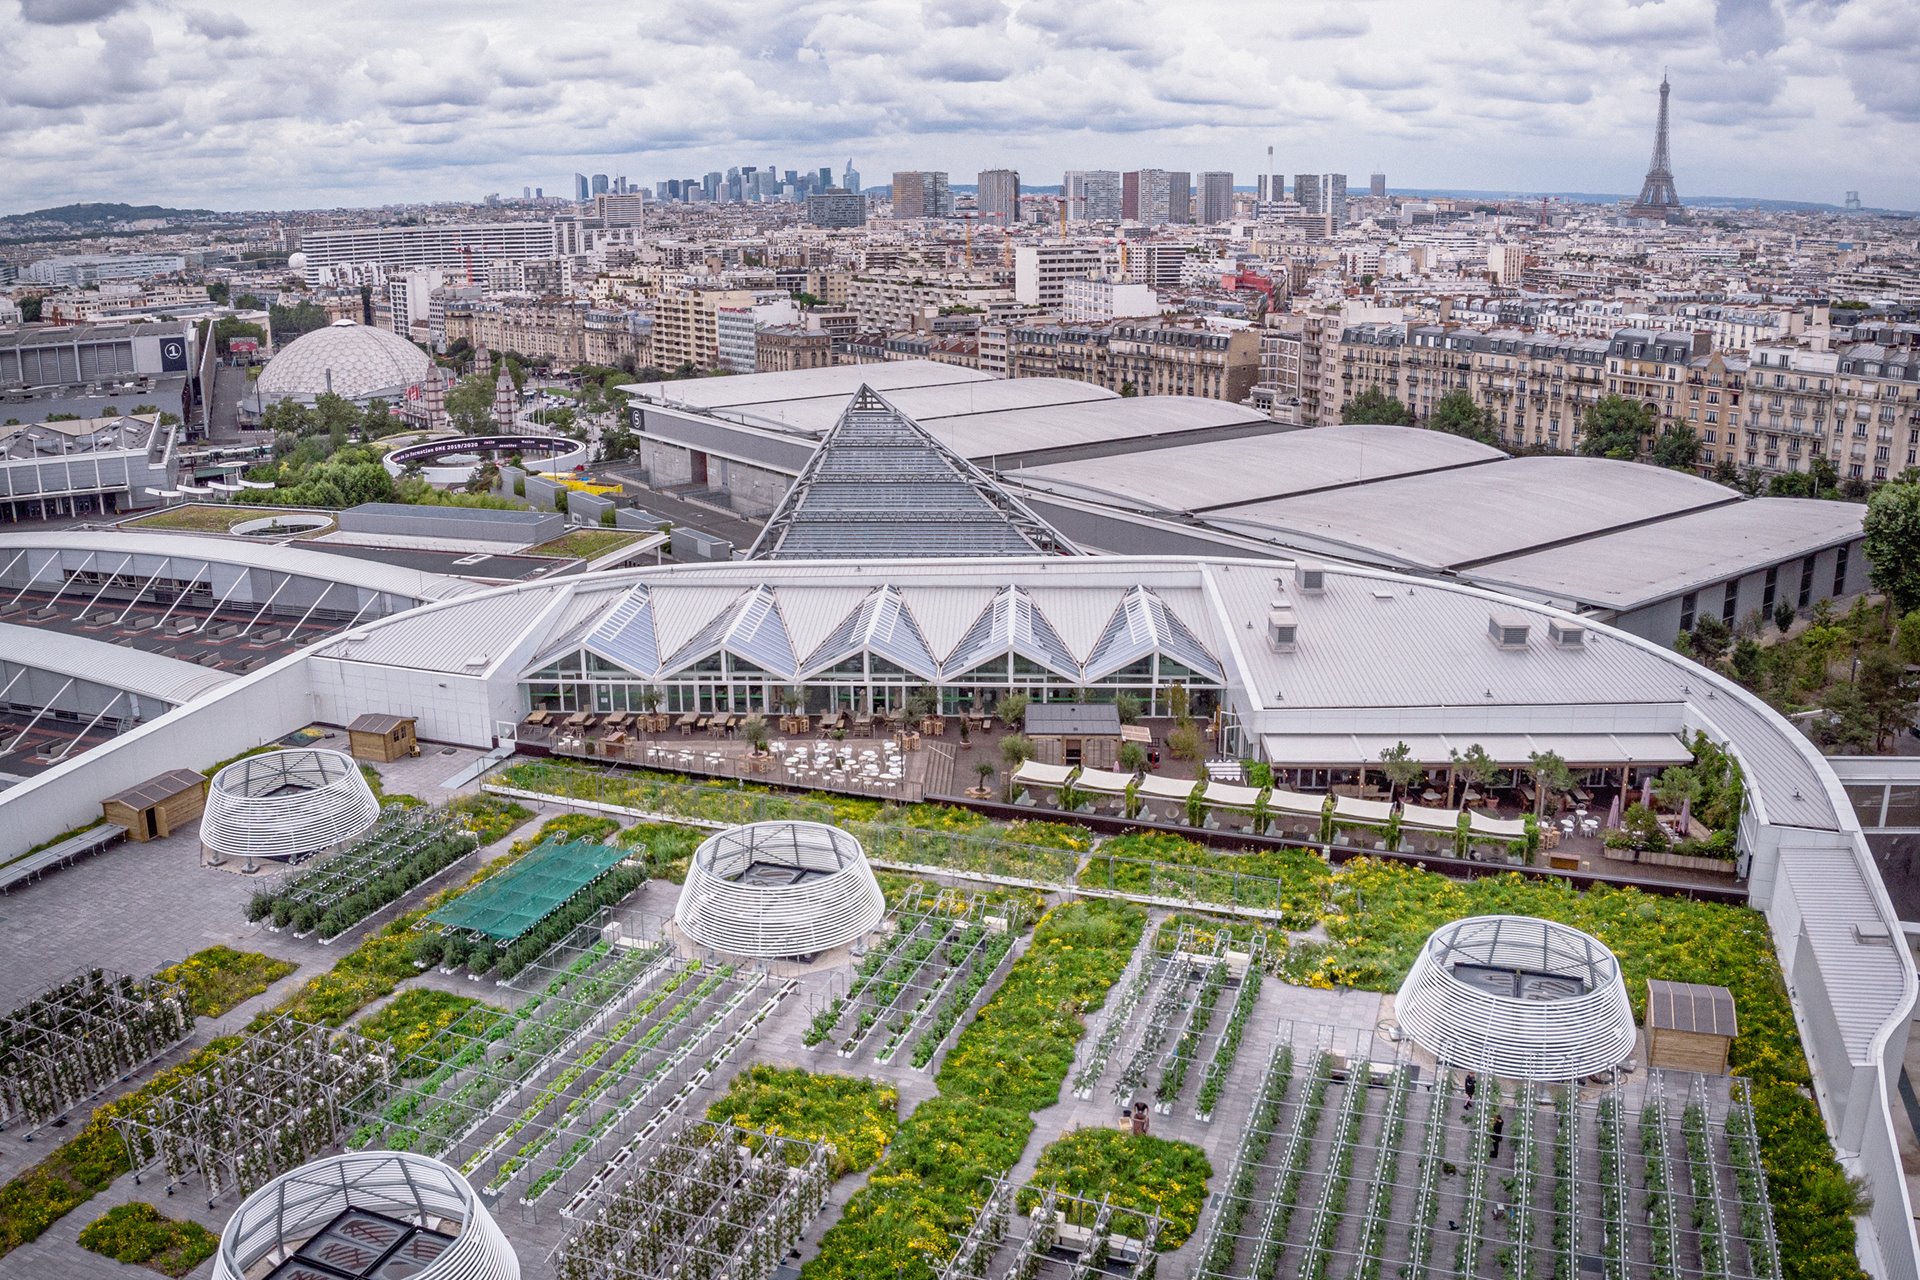 An aerial view of a rooftop farm that supplies local residents, neighboring hotels and restaurants with zero food-miles sustainable produce, in Paris, France. Occupying 14,000 square meters of space (about the size of two football pitches) the farm is home to more than 20 market gardens providing over 900 kilograms of fruit and vegetables a day in season, from about 30 different varieties of plant.&nbsp;